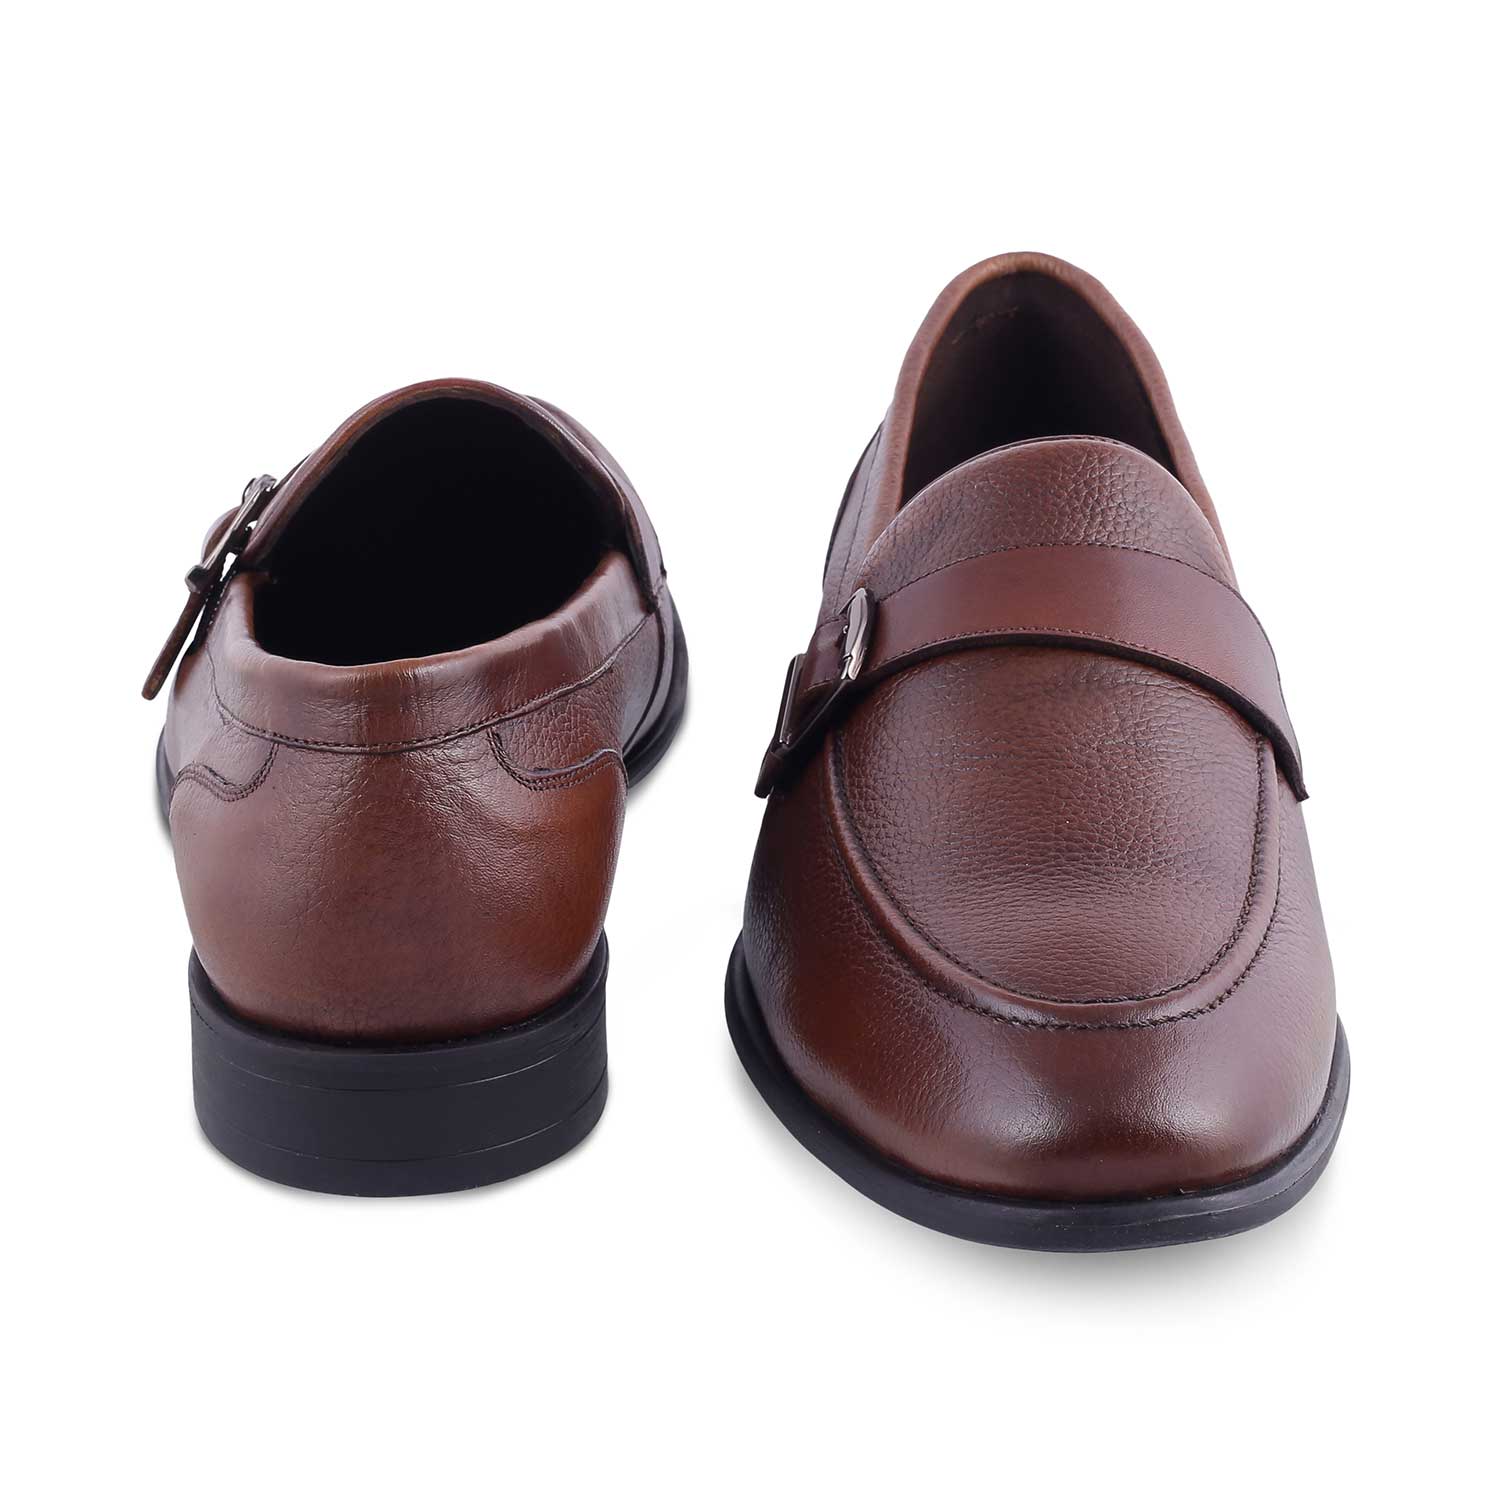 The Heiden Tan Men's Leather Loafers Tresmode